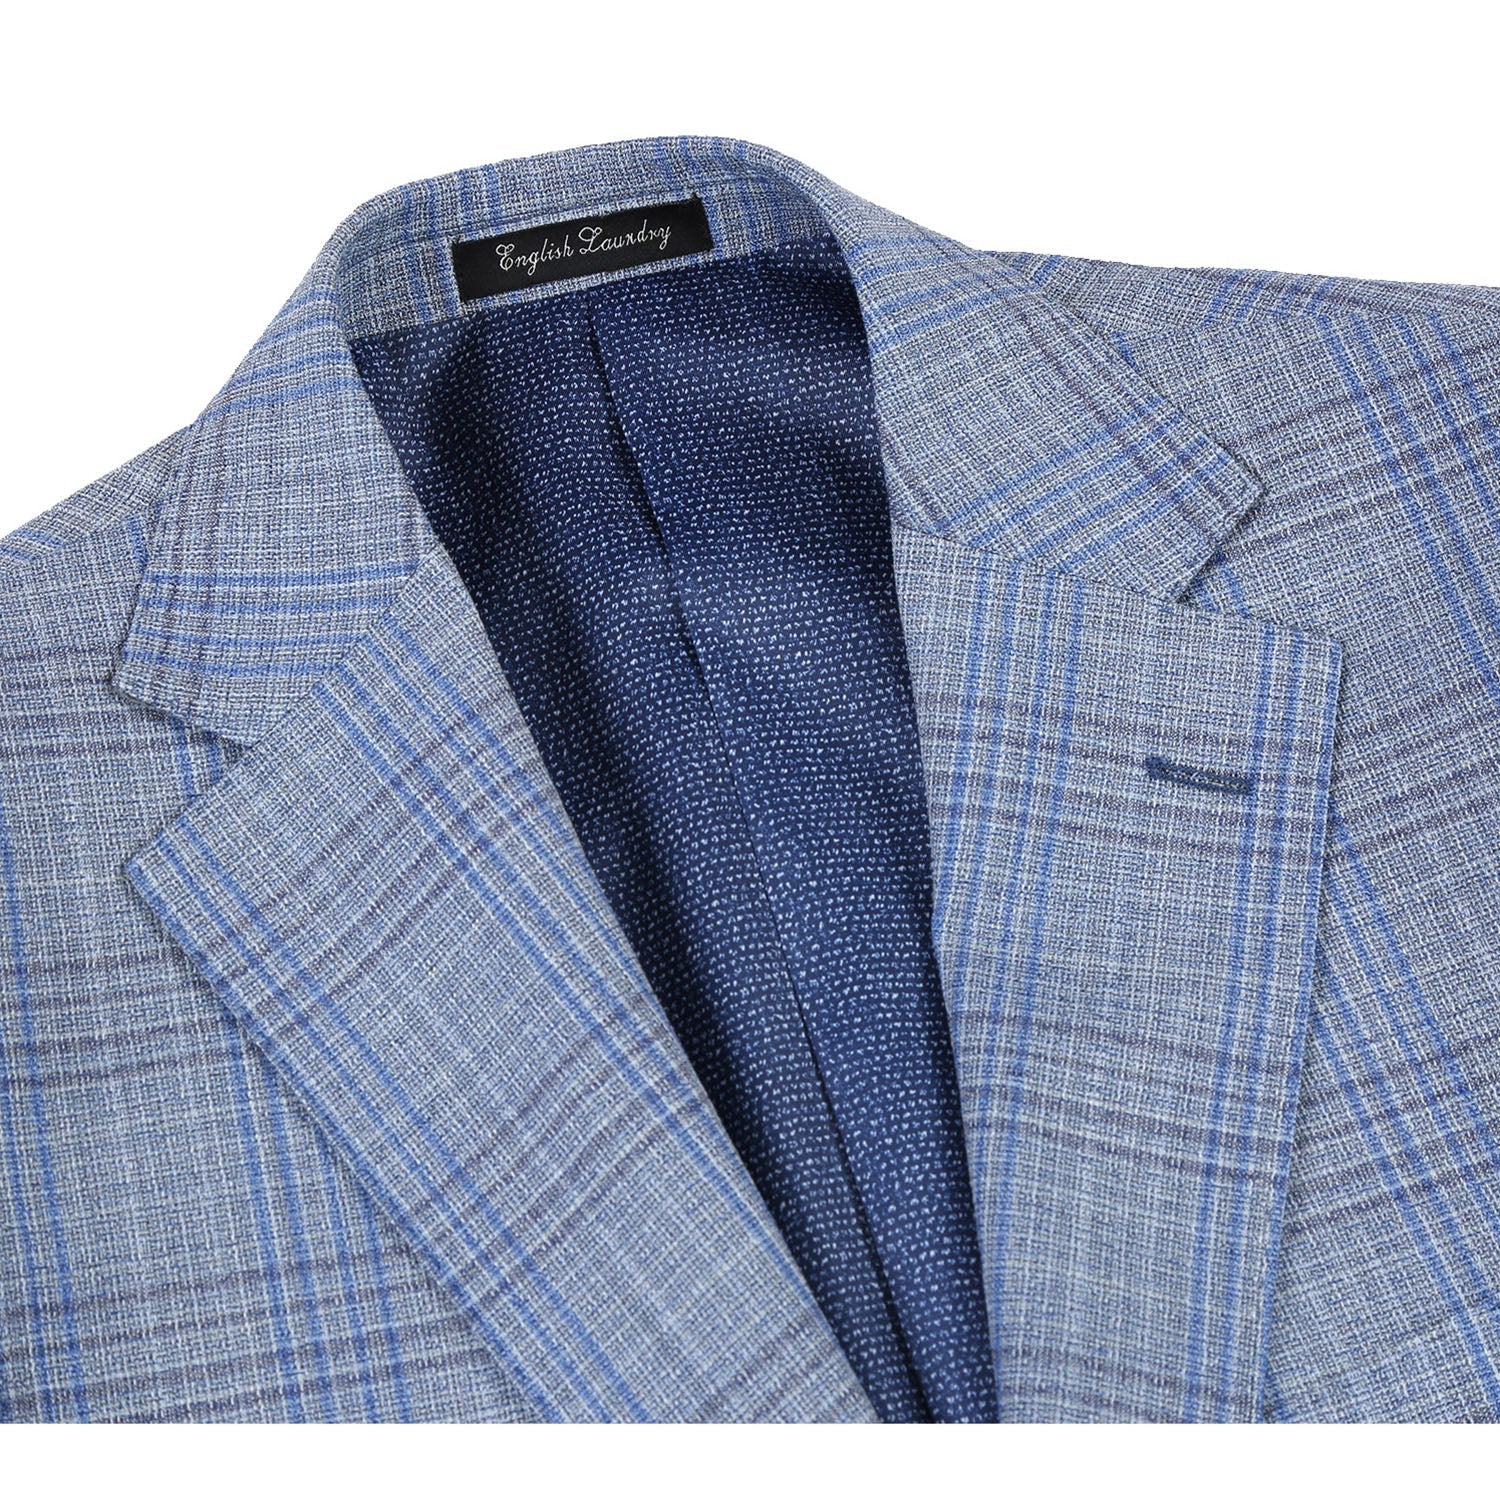 English Laundry Light Gray with Blue Check Wool Suit 4